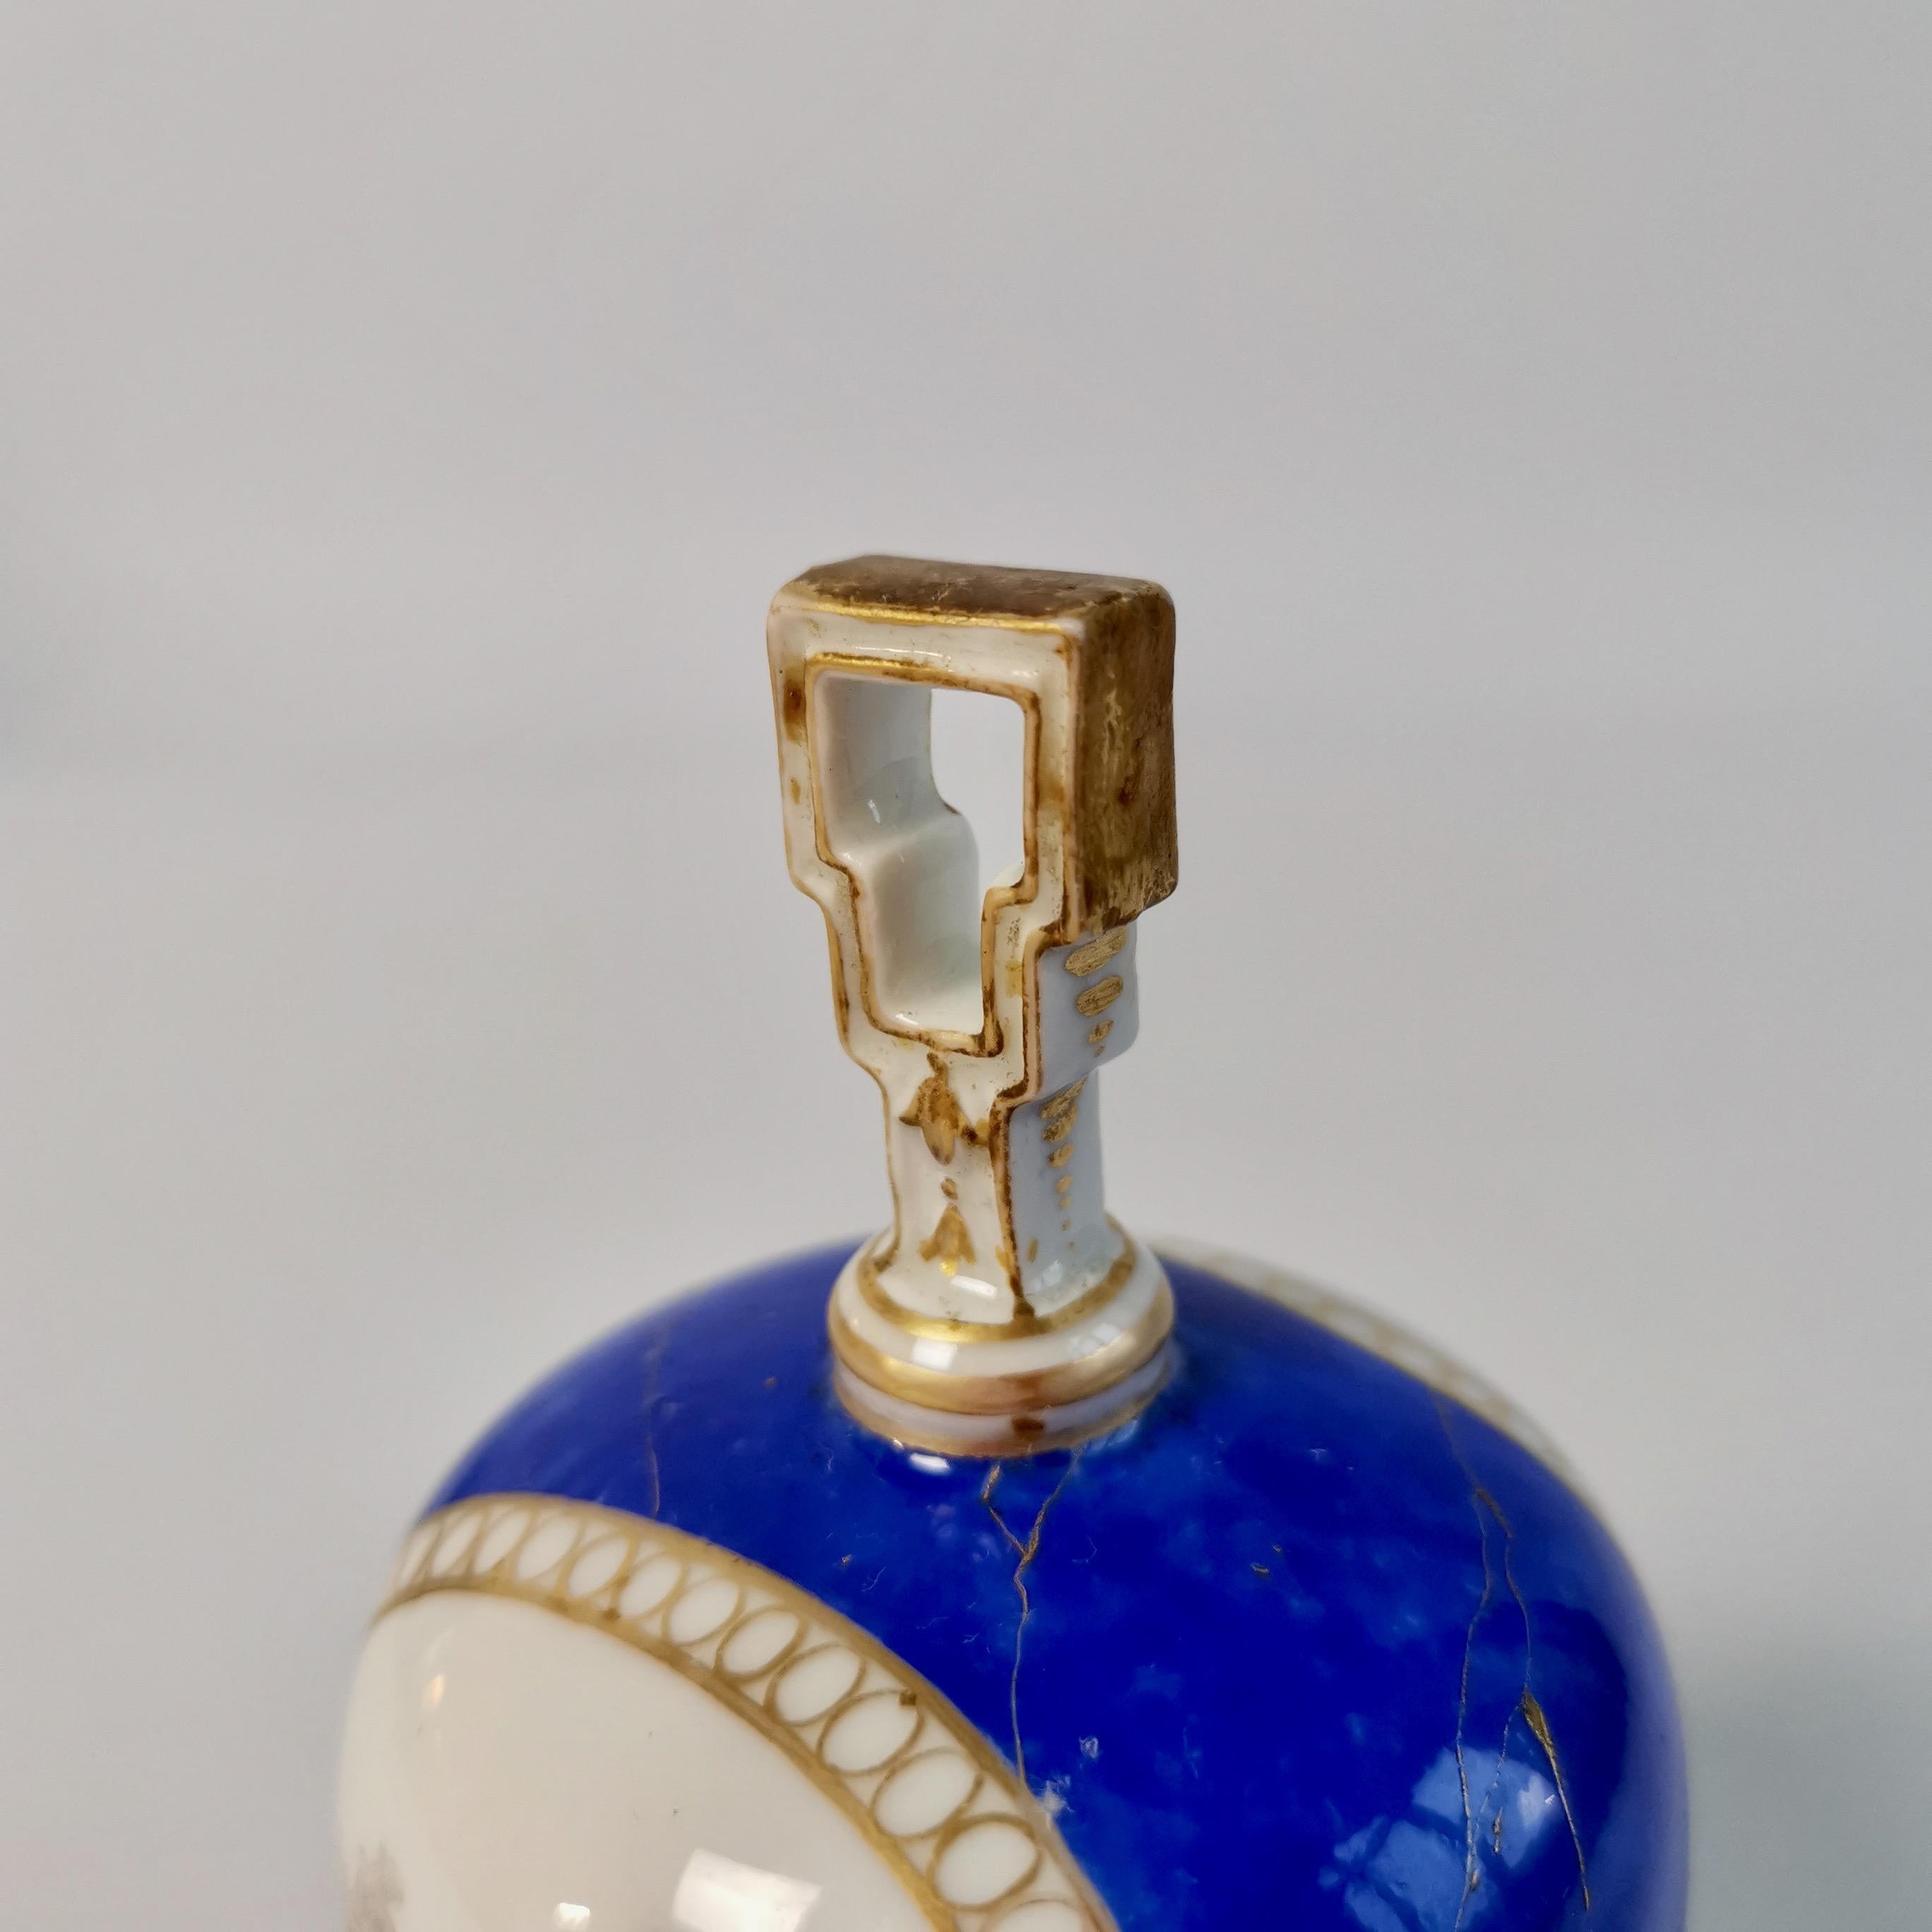 Meissen Porcelain Table Bell, Blue with Romantic Scenes, 19th C 3